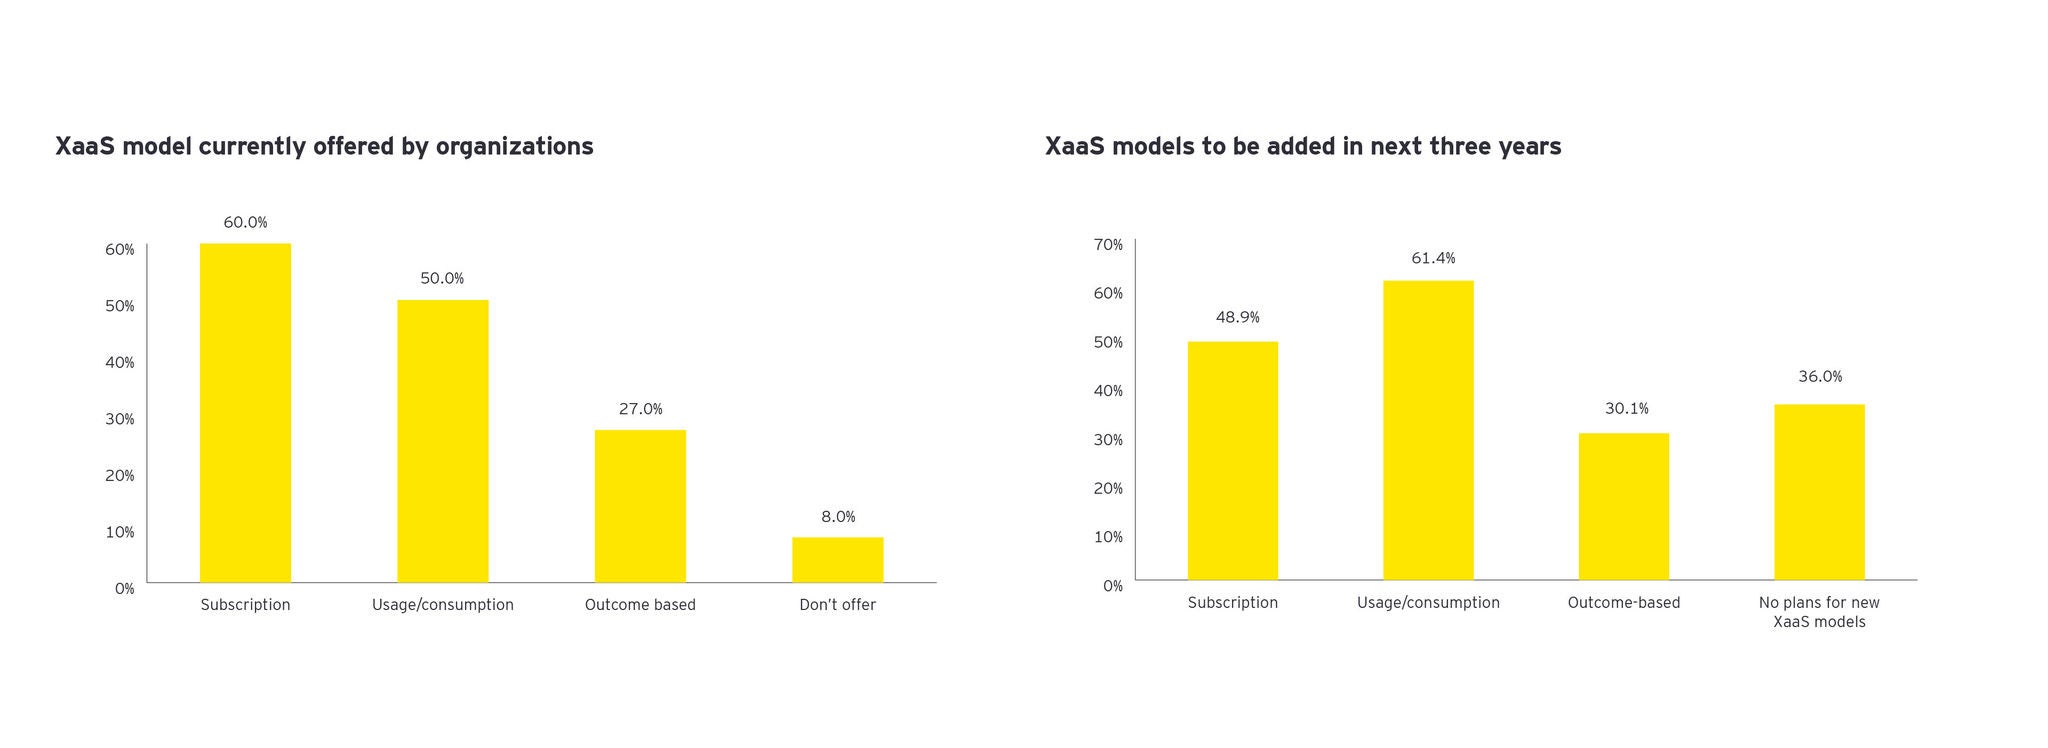 XaaS models offered today and to be added in the next three years